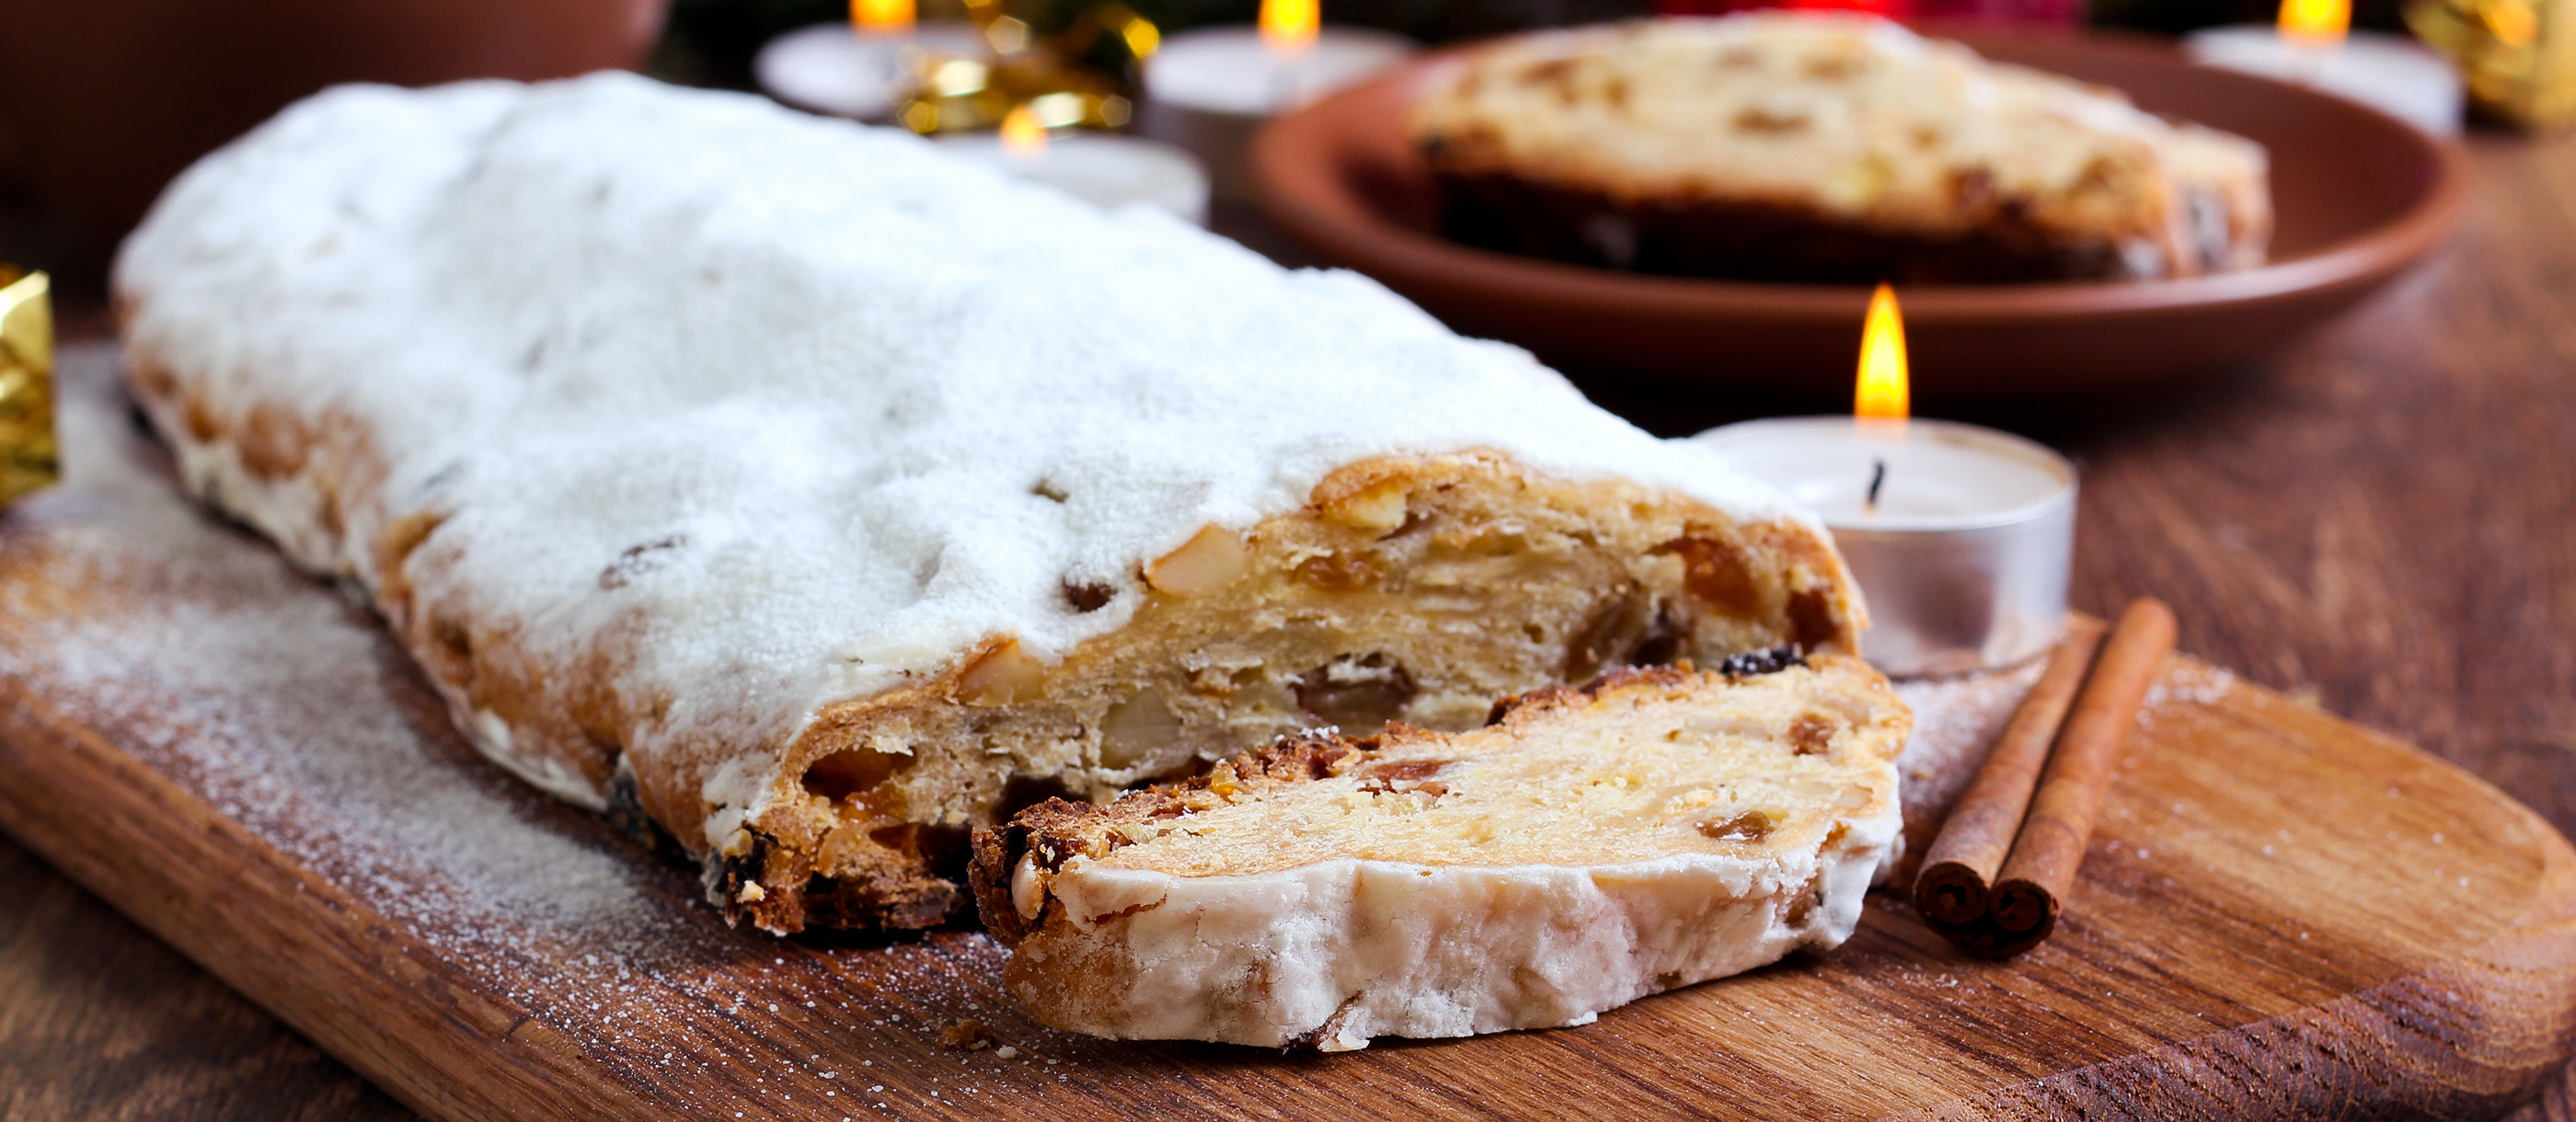 Dresdner Stollen | Traditional Sweet Bread From Dresden, Germany